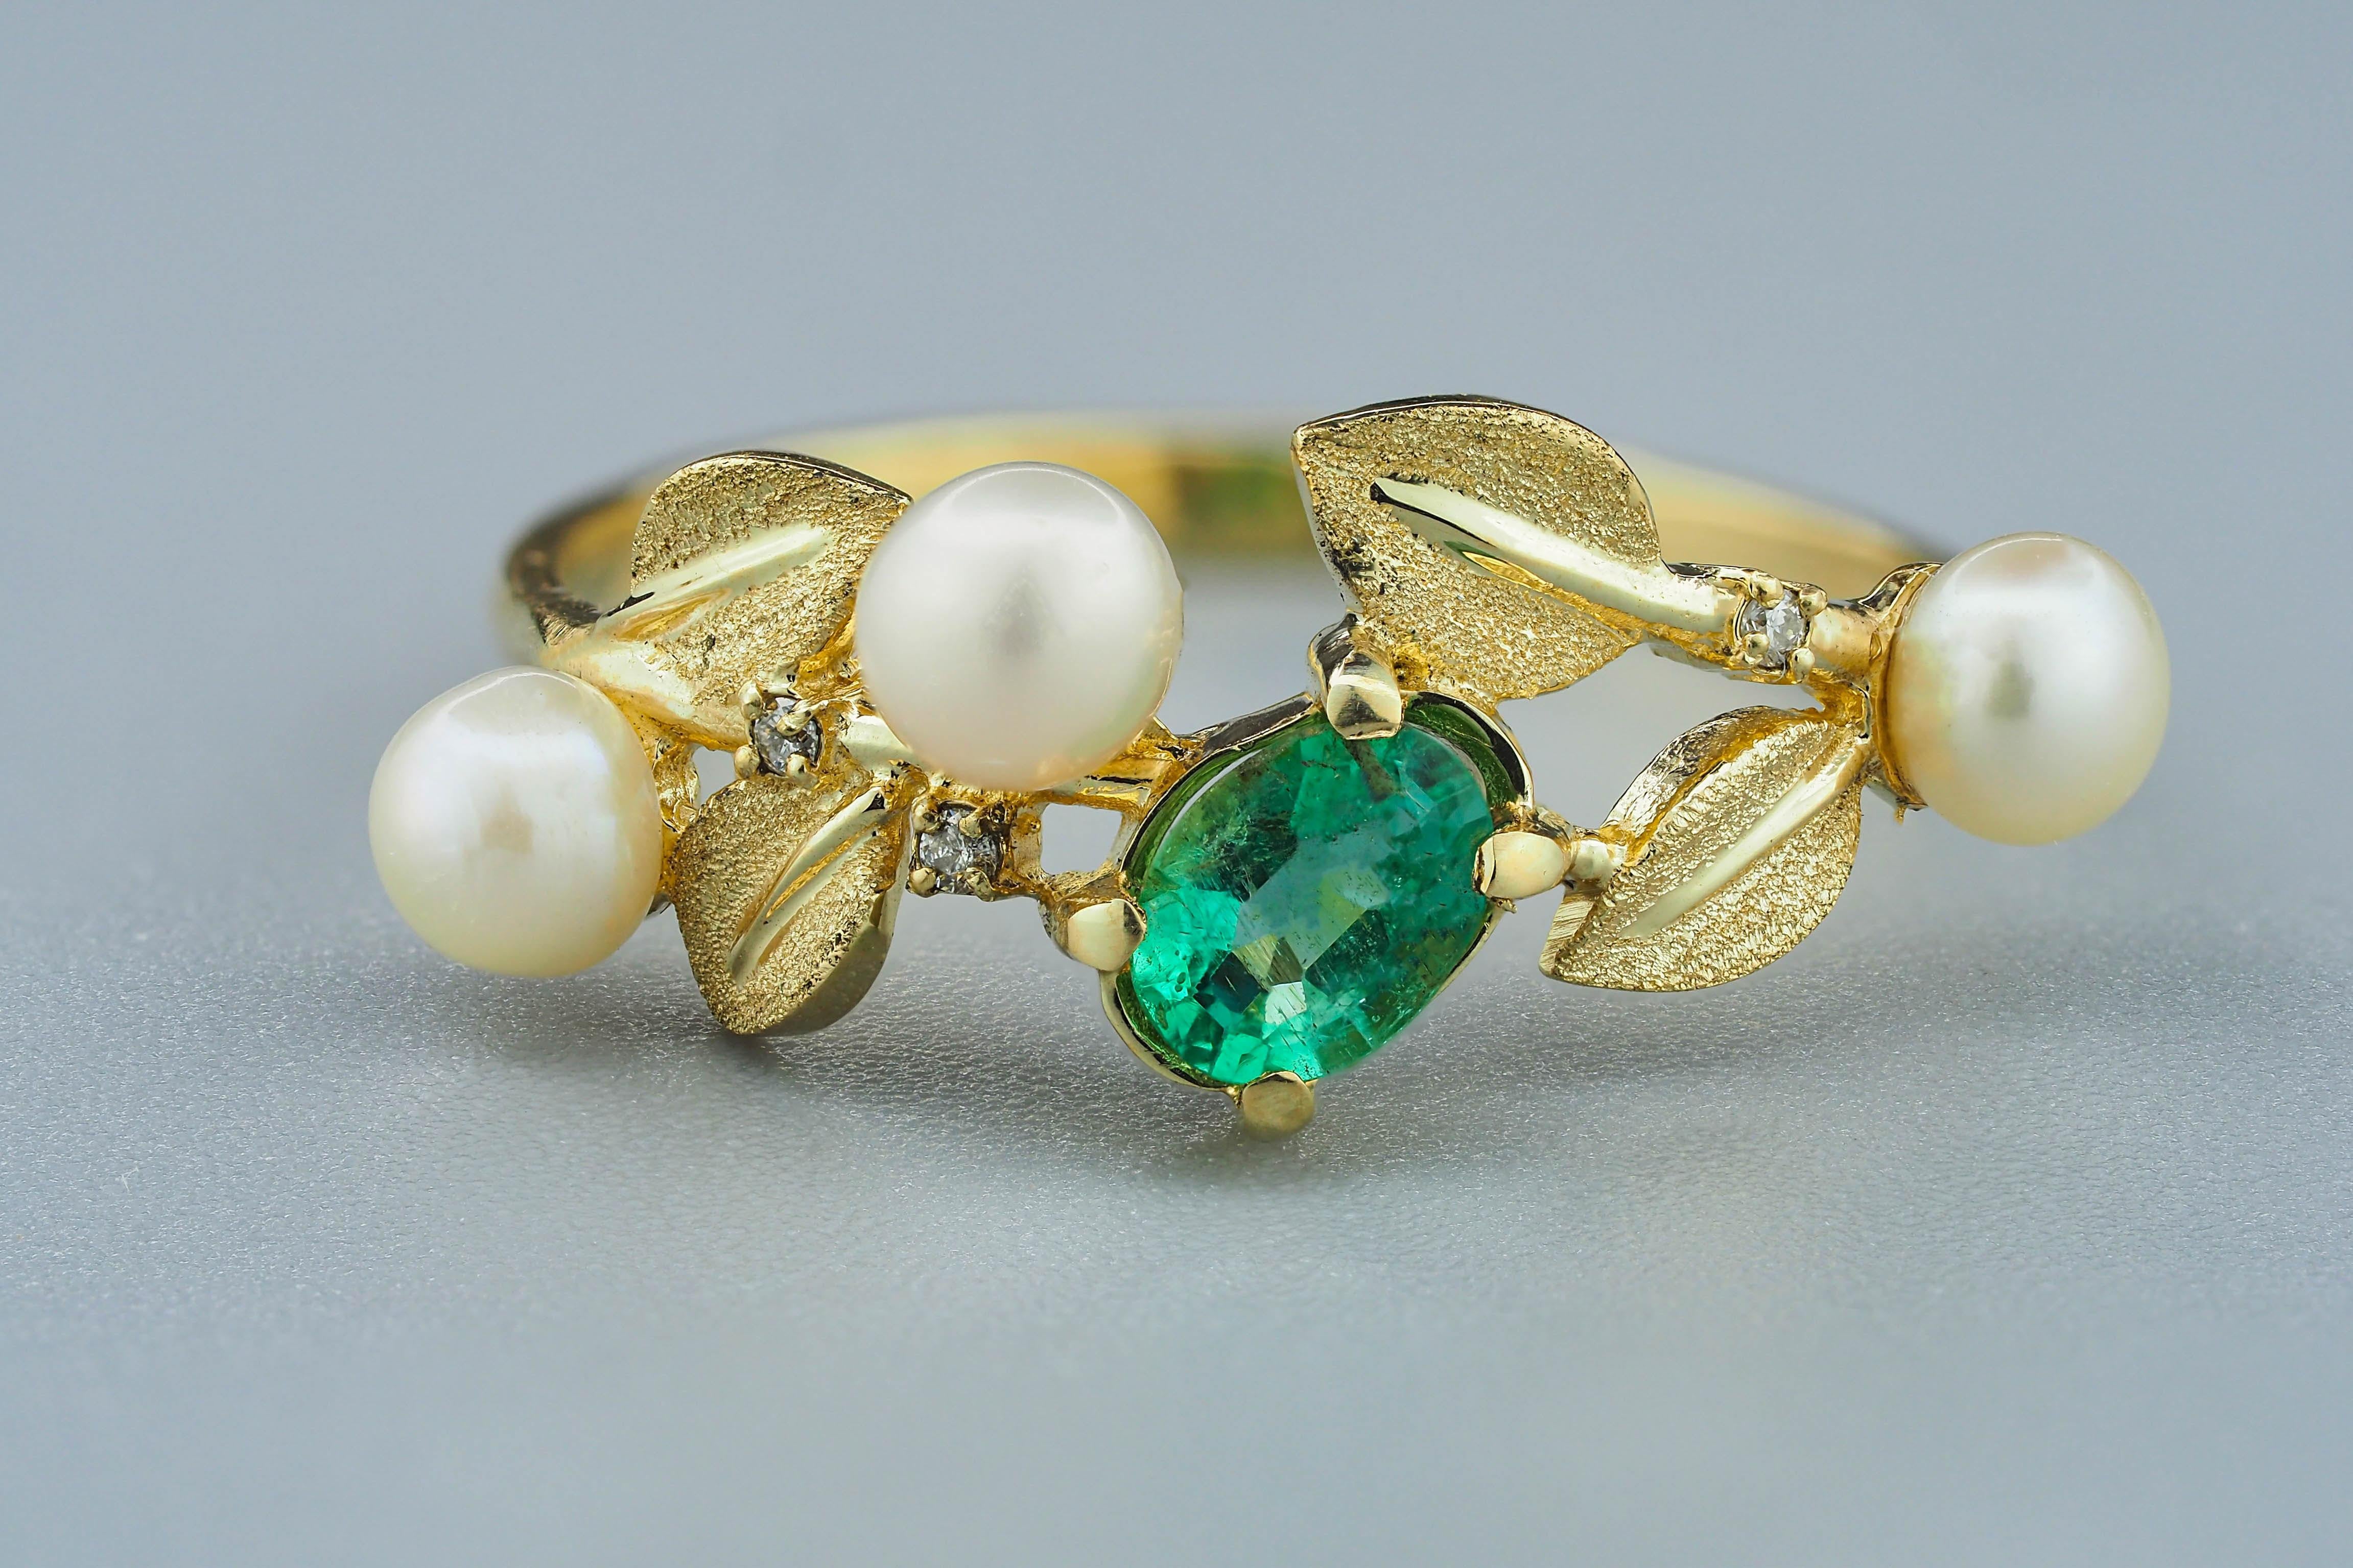 Women's 14k Gold Ring with Emerald, Pearls and Diamonds